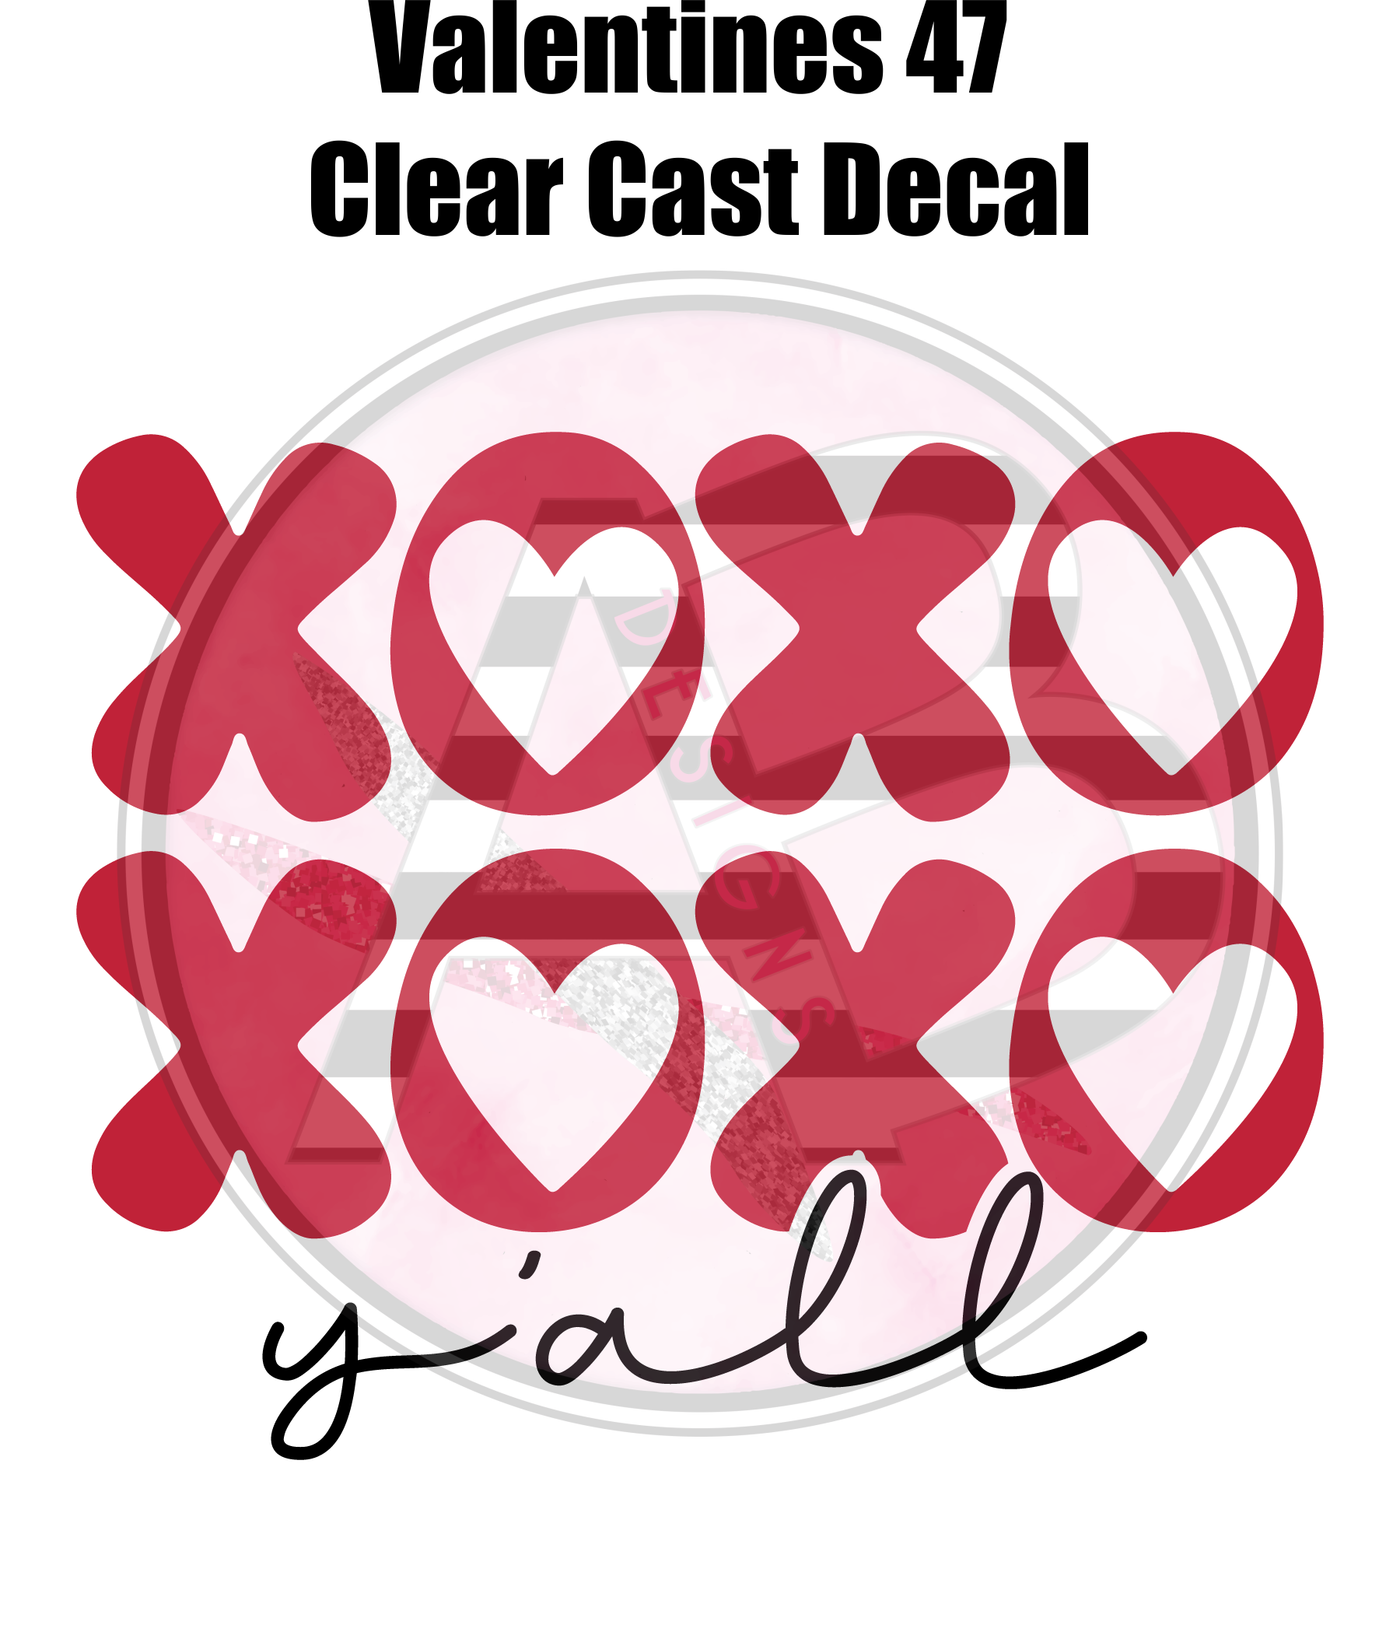 Valentines 47 - Clear Cast Decal